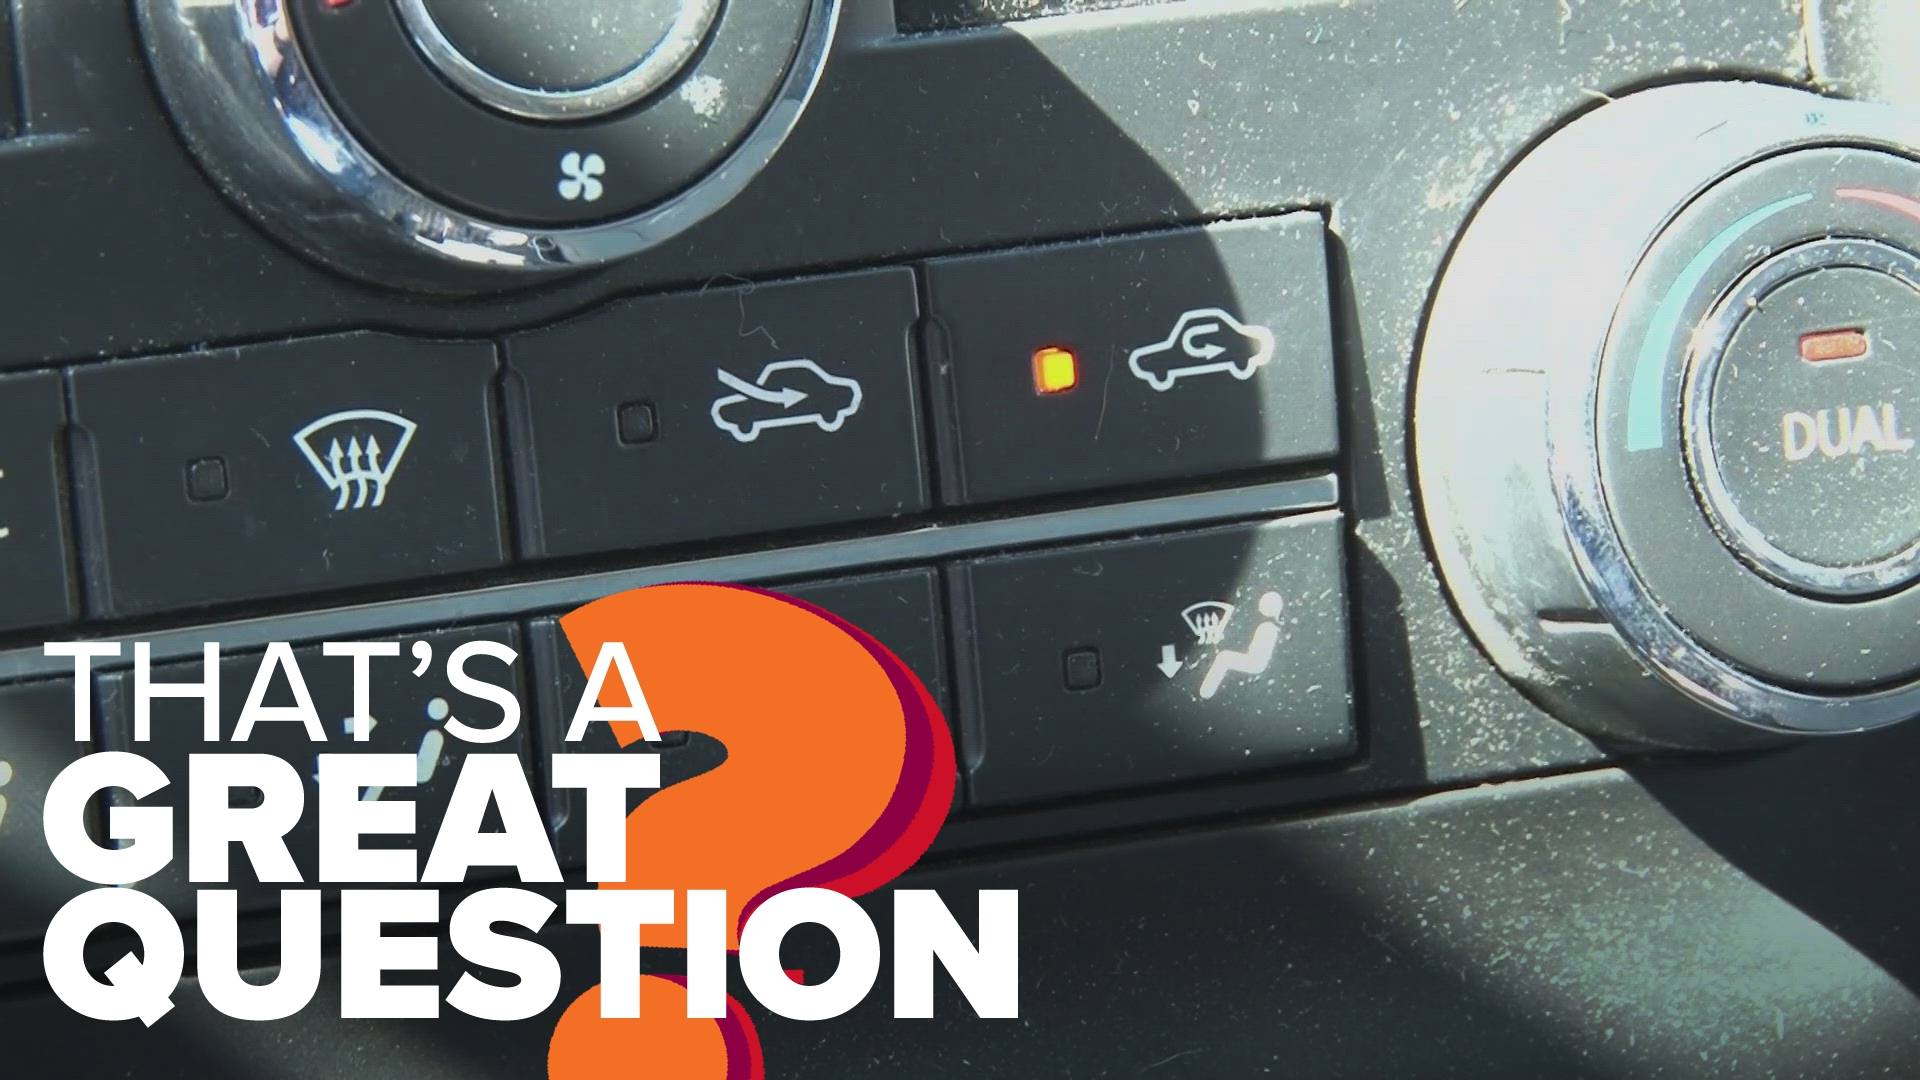 As June heats up in Arkansas, it's important to stay cool, even in the car— and knowing where to find your recirculation button can help keep the A/C blowing cold.